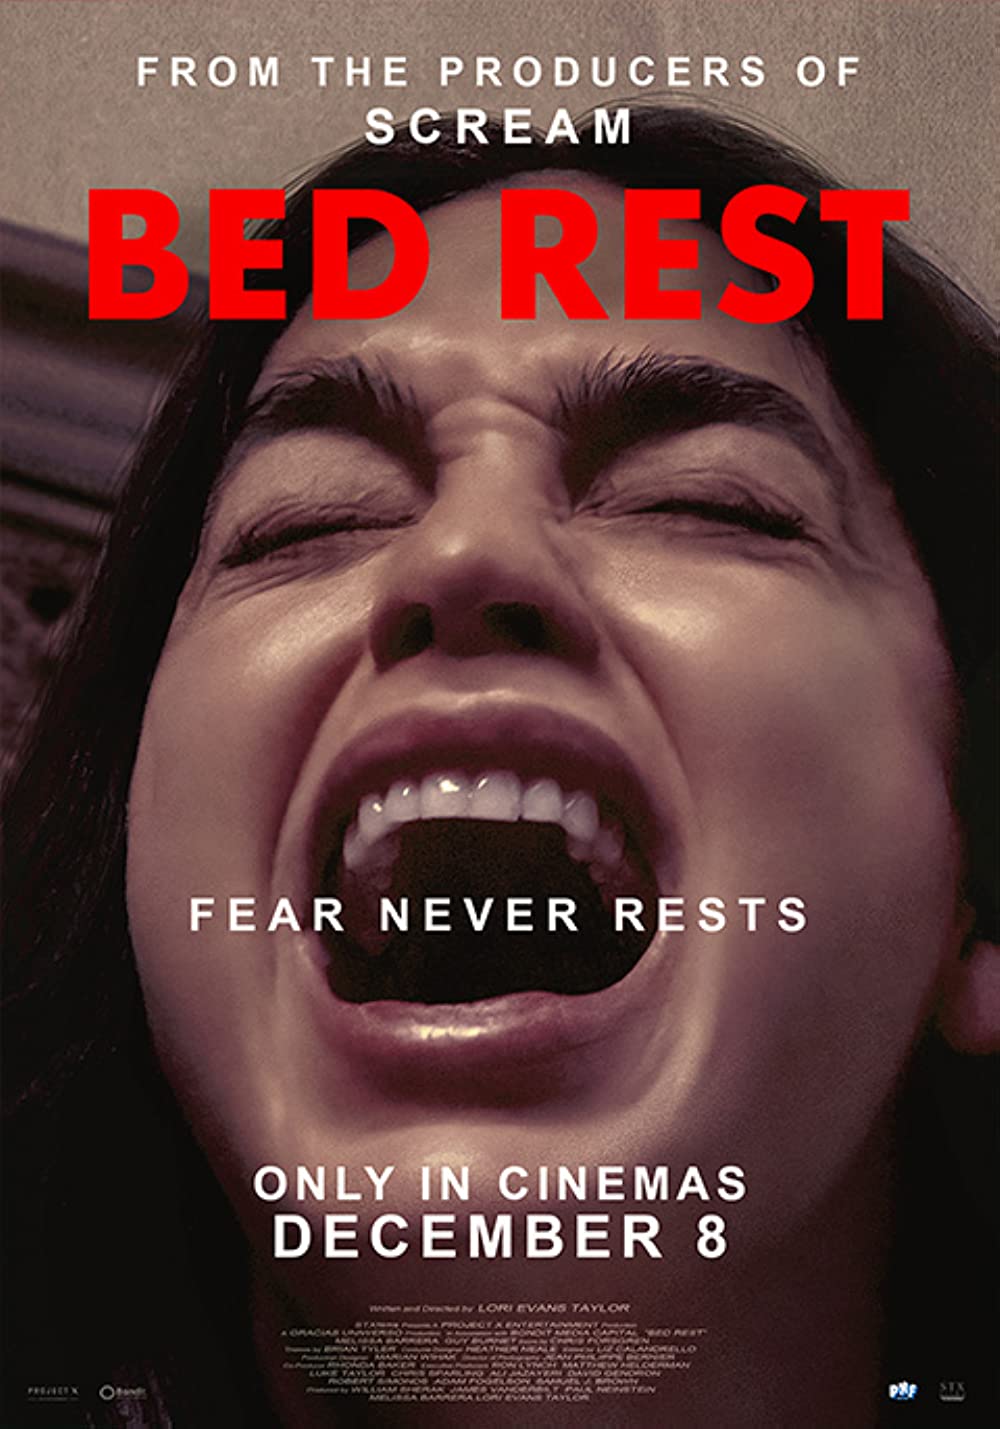 Bed Rest Movie (2022) Cast & Crew, Release Date, Story, Review, Poster, Trailer, Budget, Collection